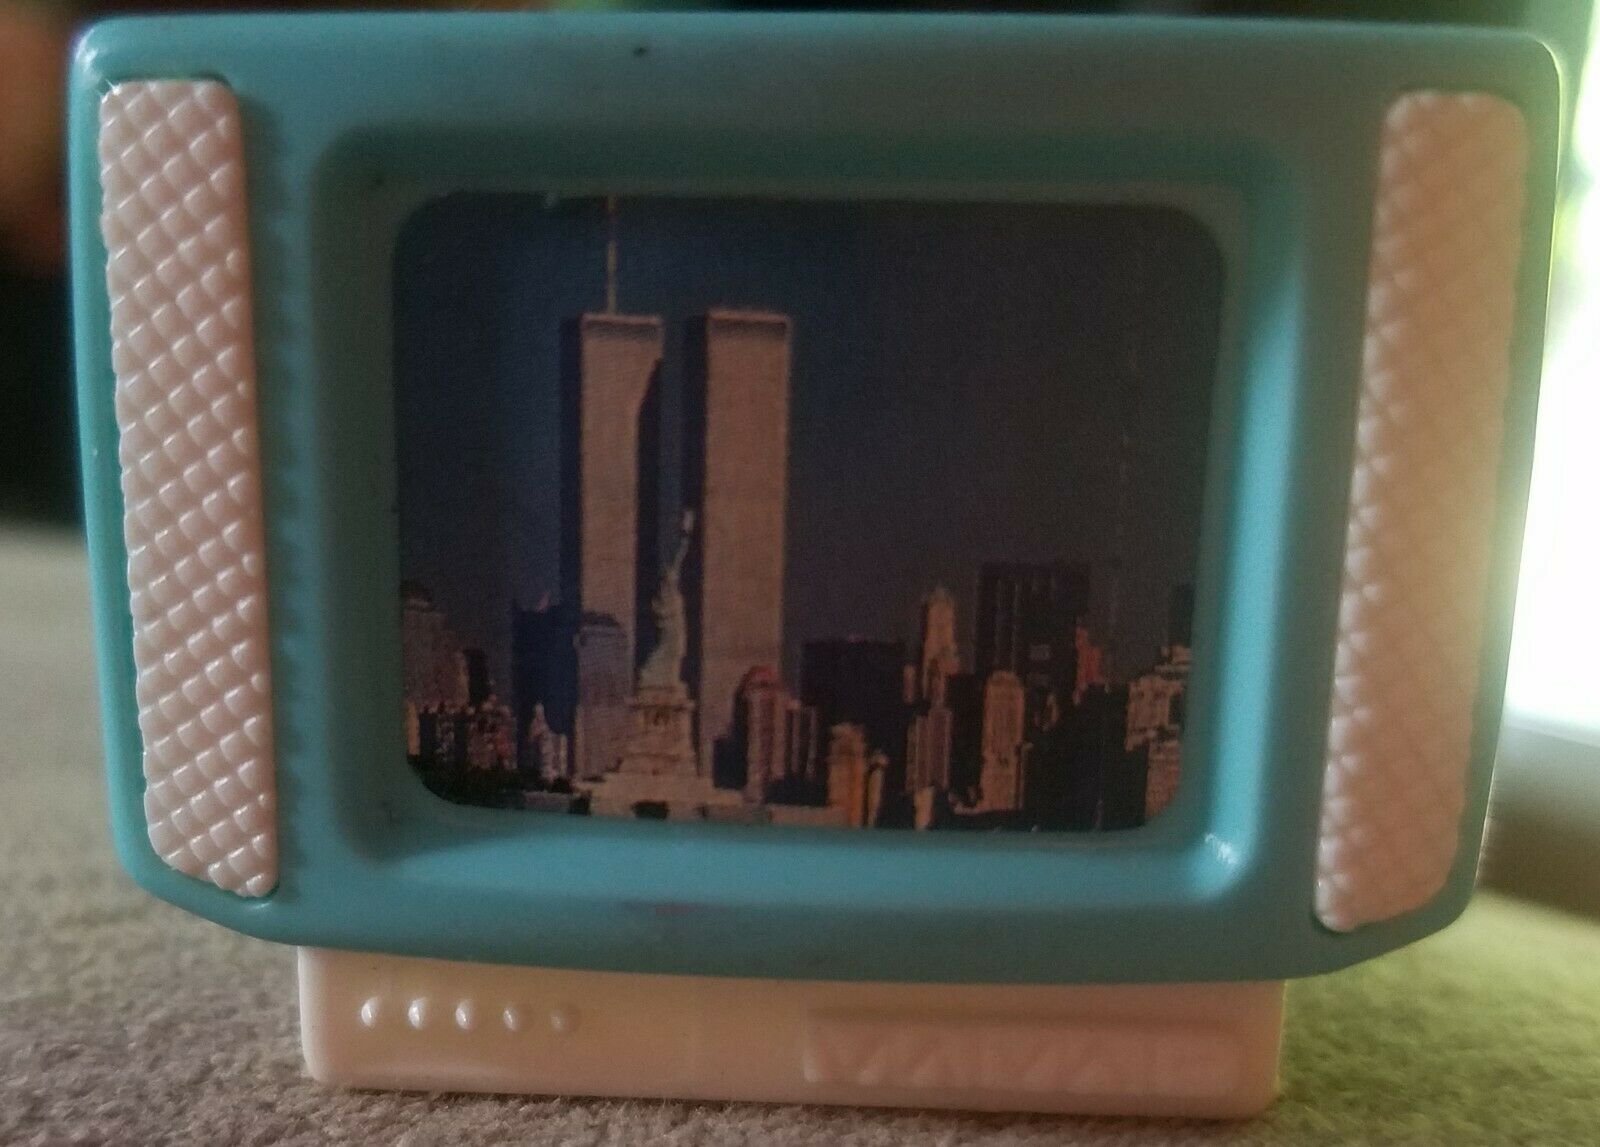 Twin Towers Statute Of Liberty New York City Dollhouse Miniature Television